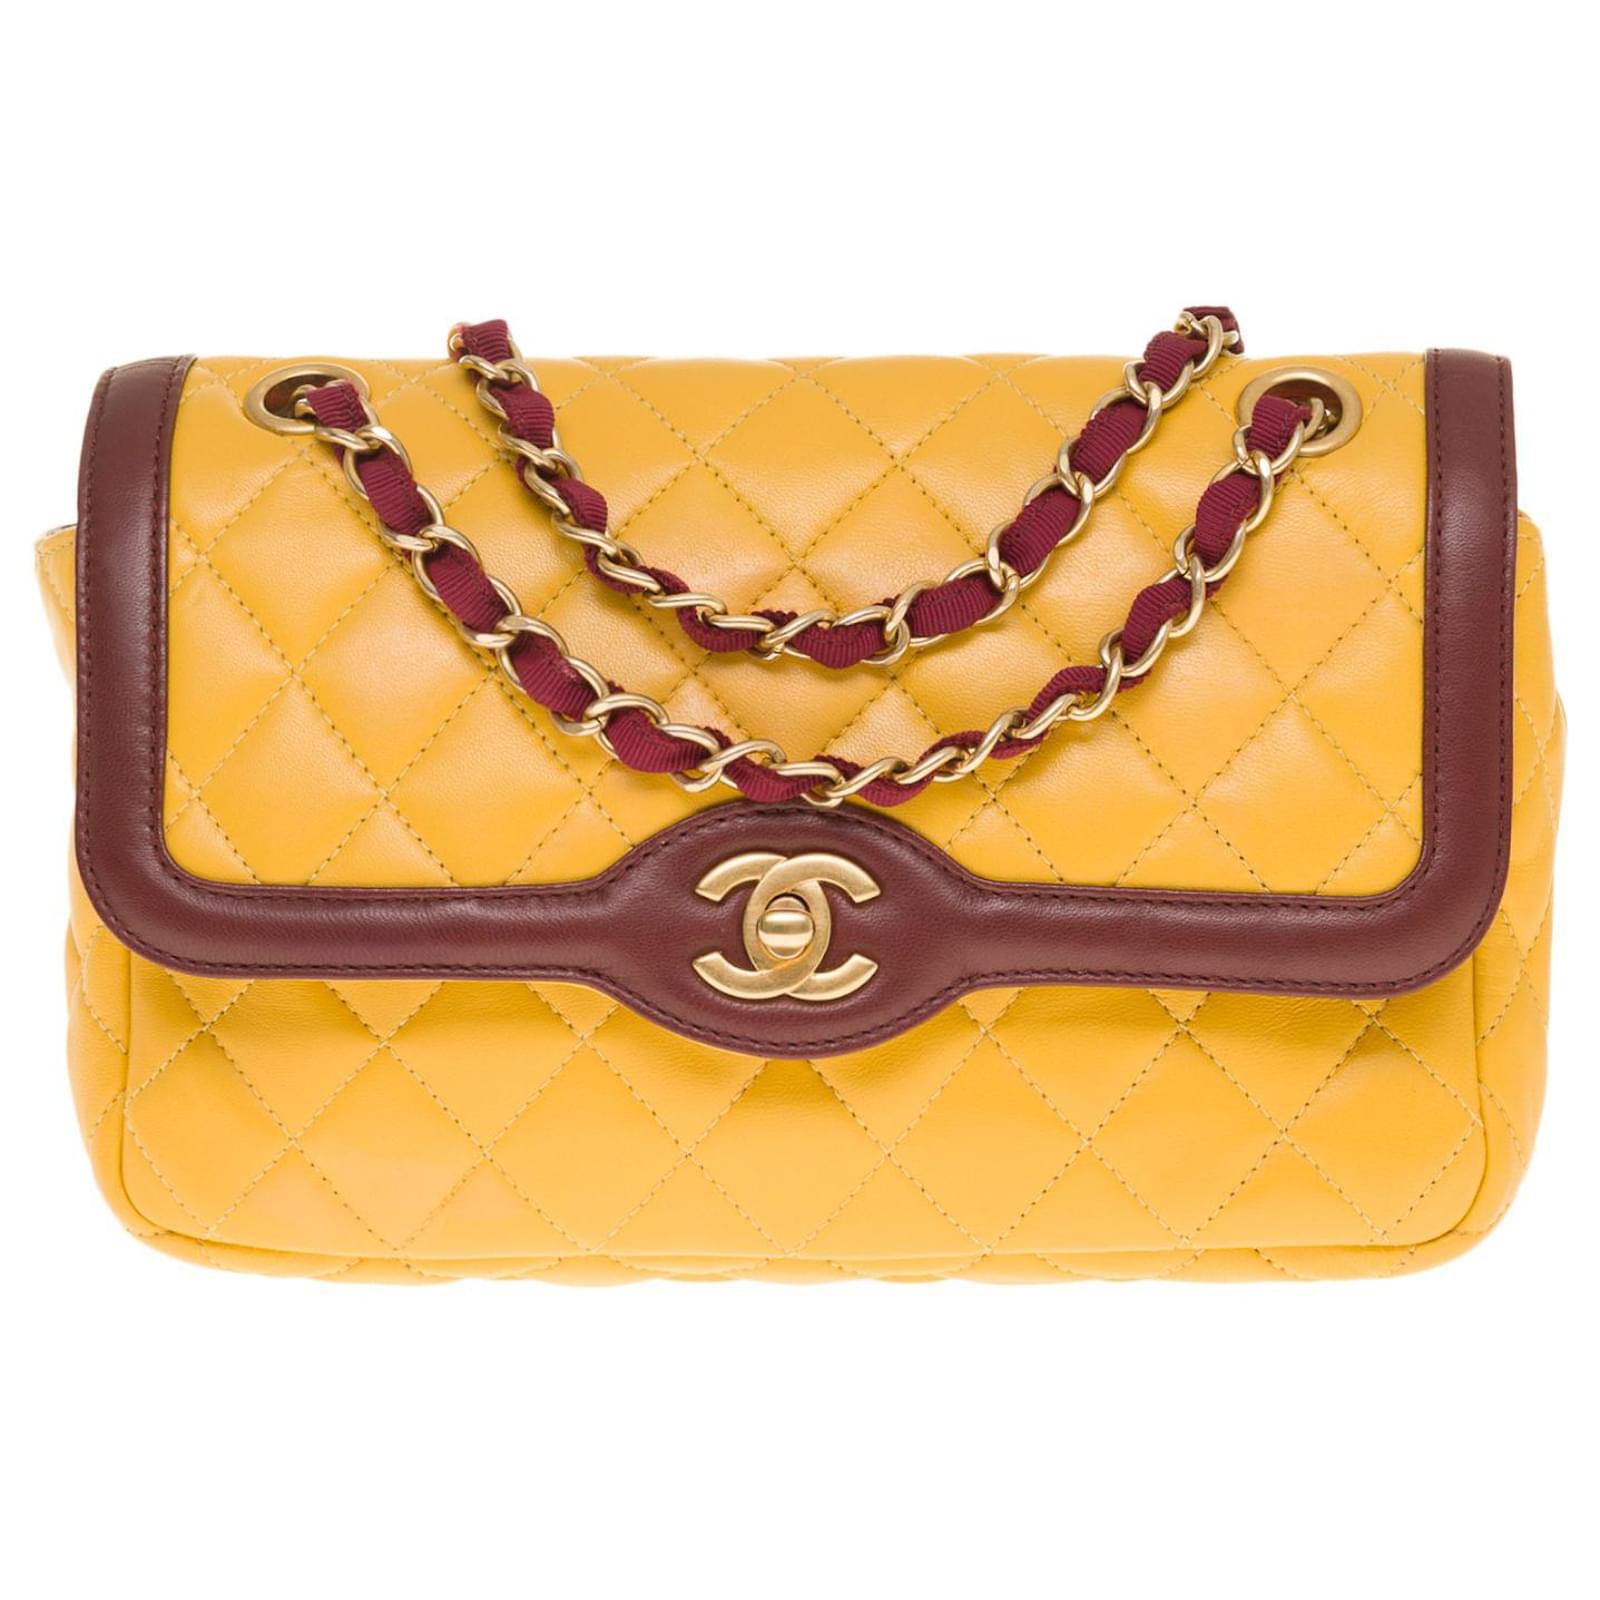 Superb Diana Chanel bag in yellow and brown two-tone lambskin with